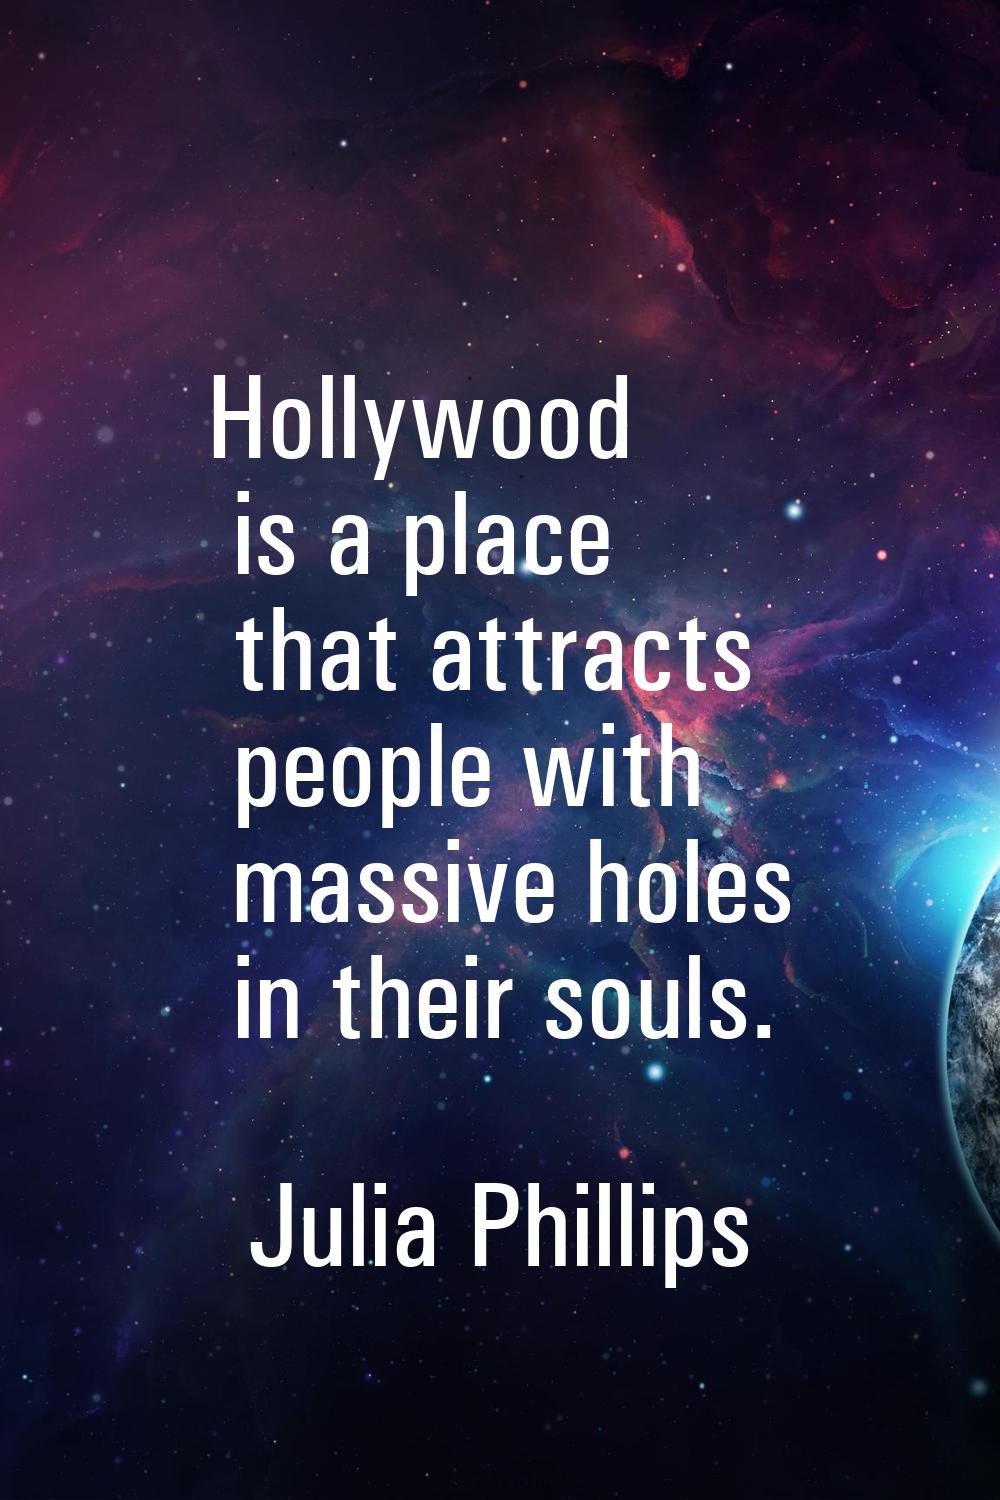 Hollywood is a place that attracts people with massive holes in their souls.